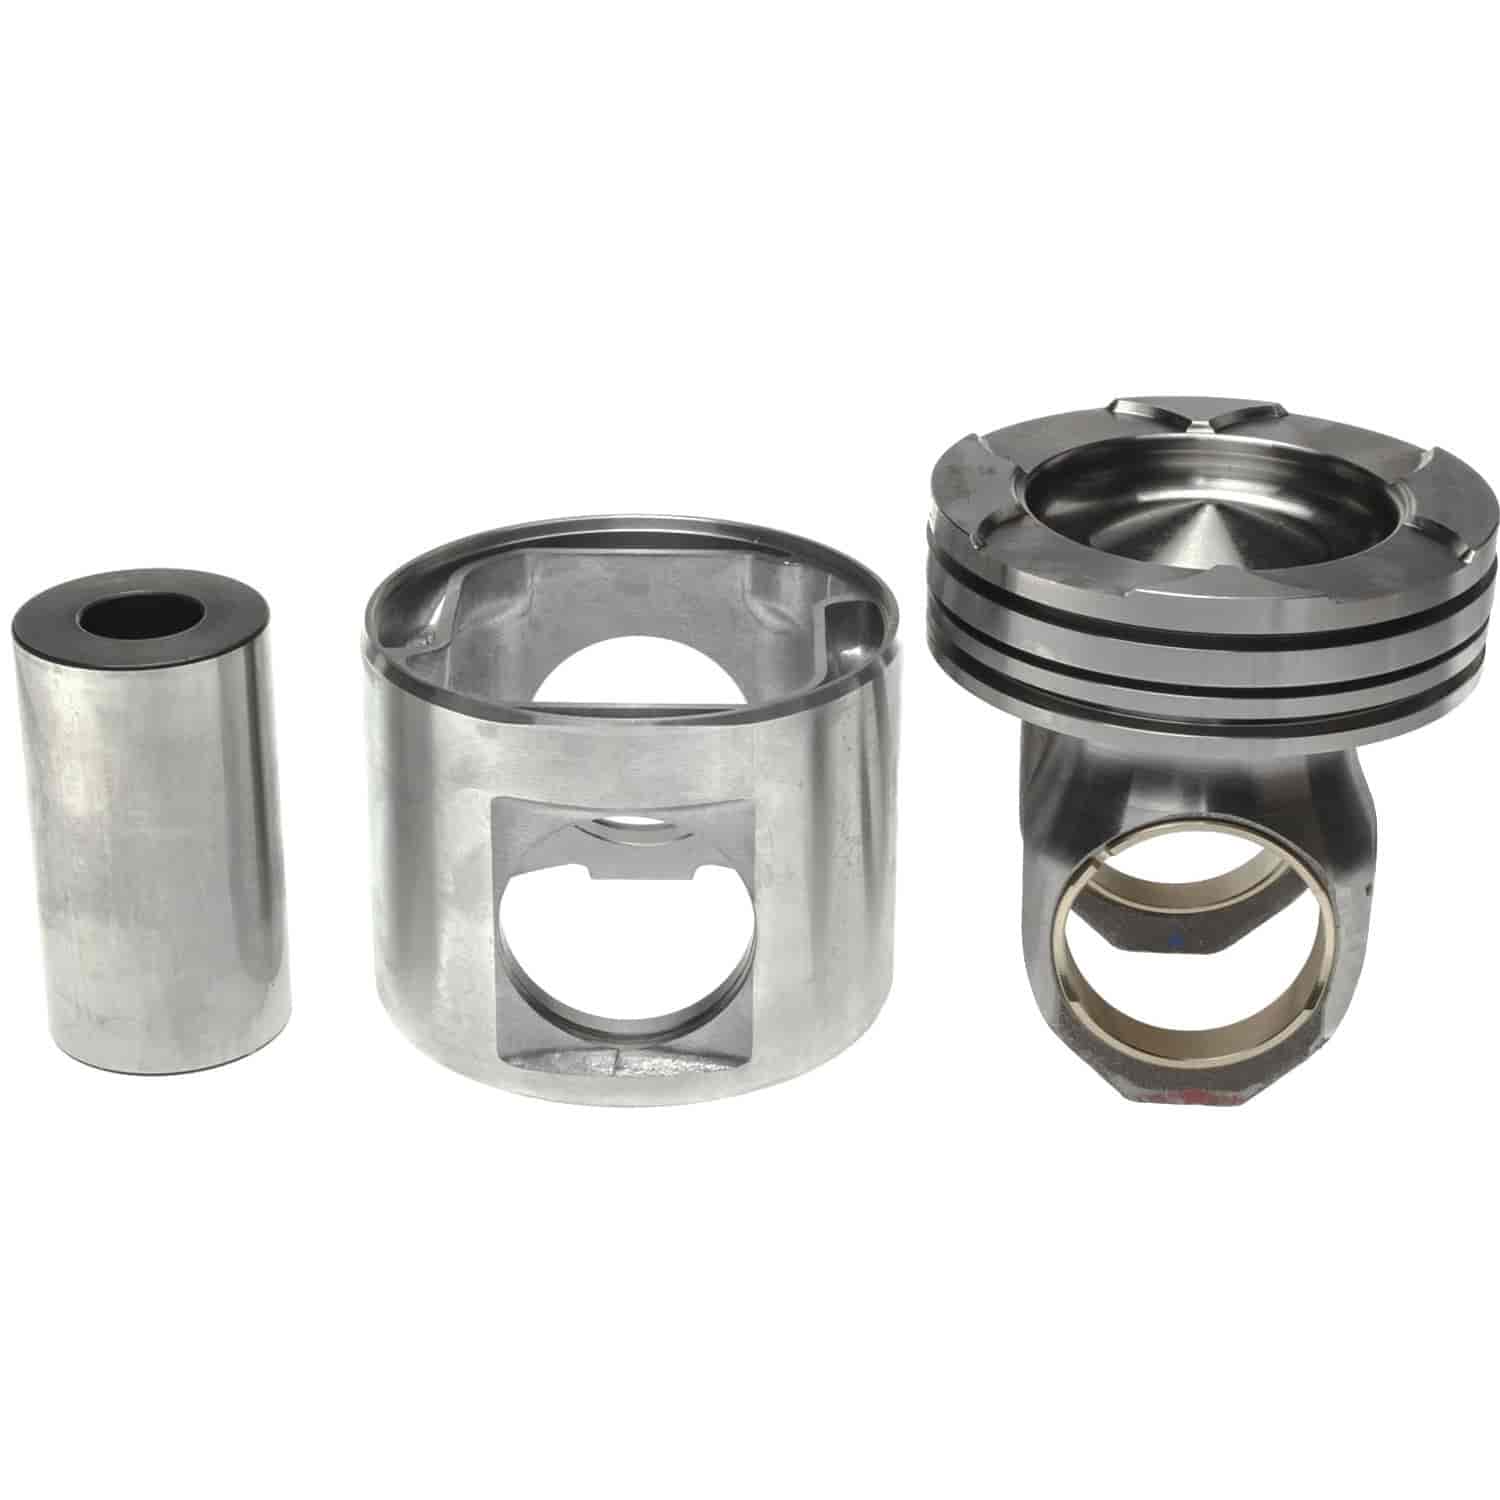 Piston Assembly for Cummins N14 Engines. Piston Pin